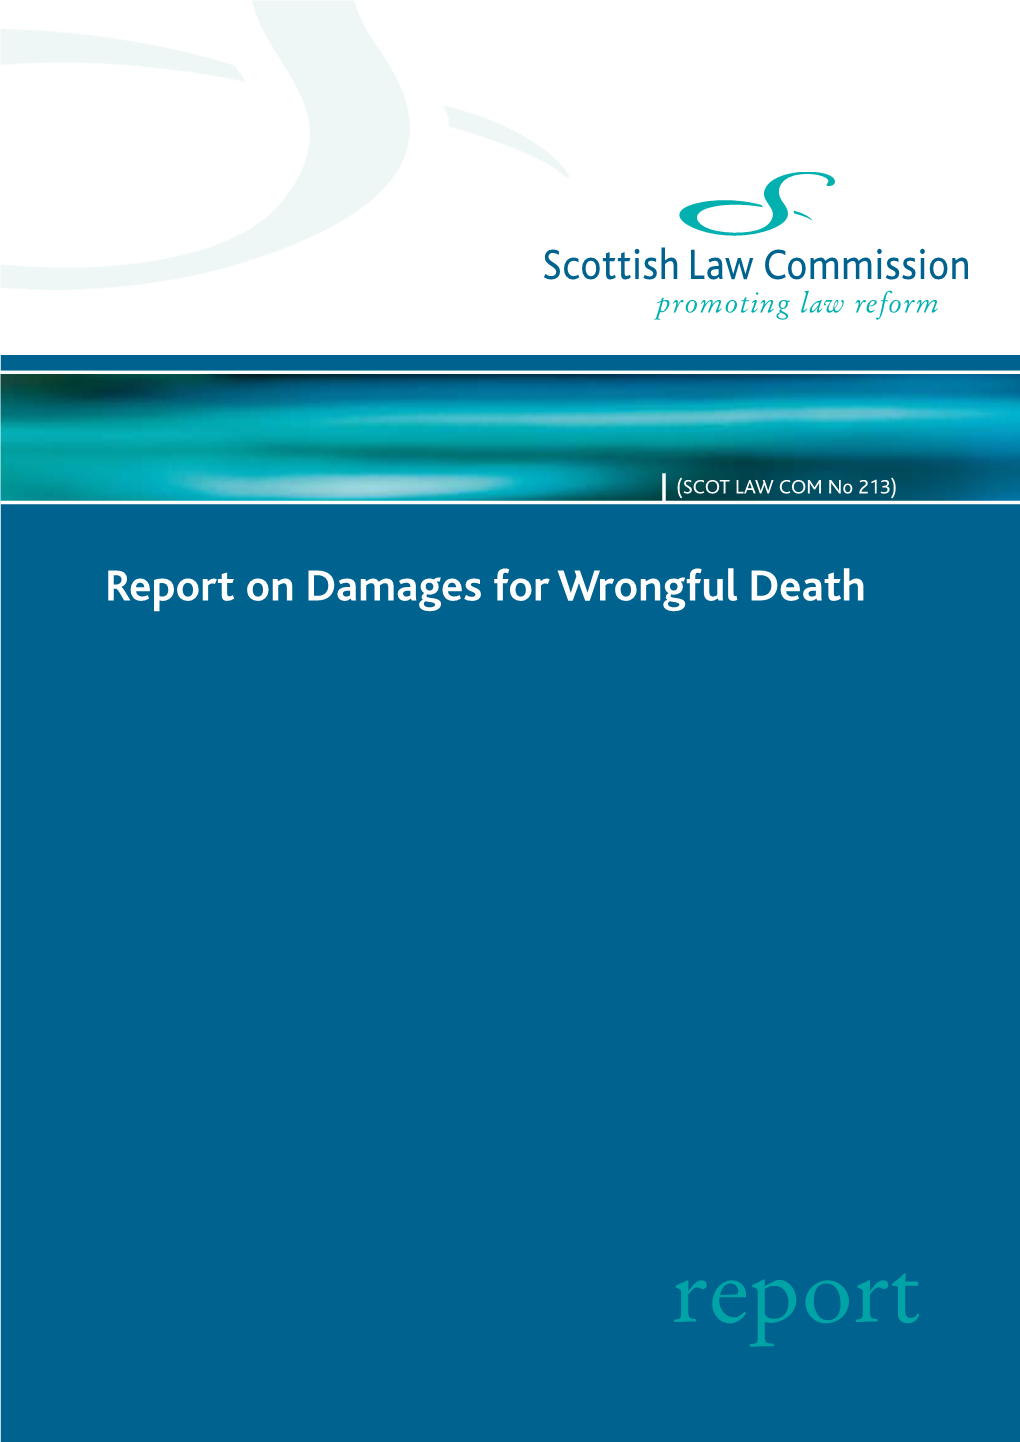 Report on Damages for Wrongful Death (SLC 213)